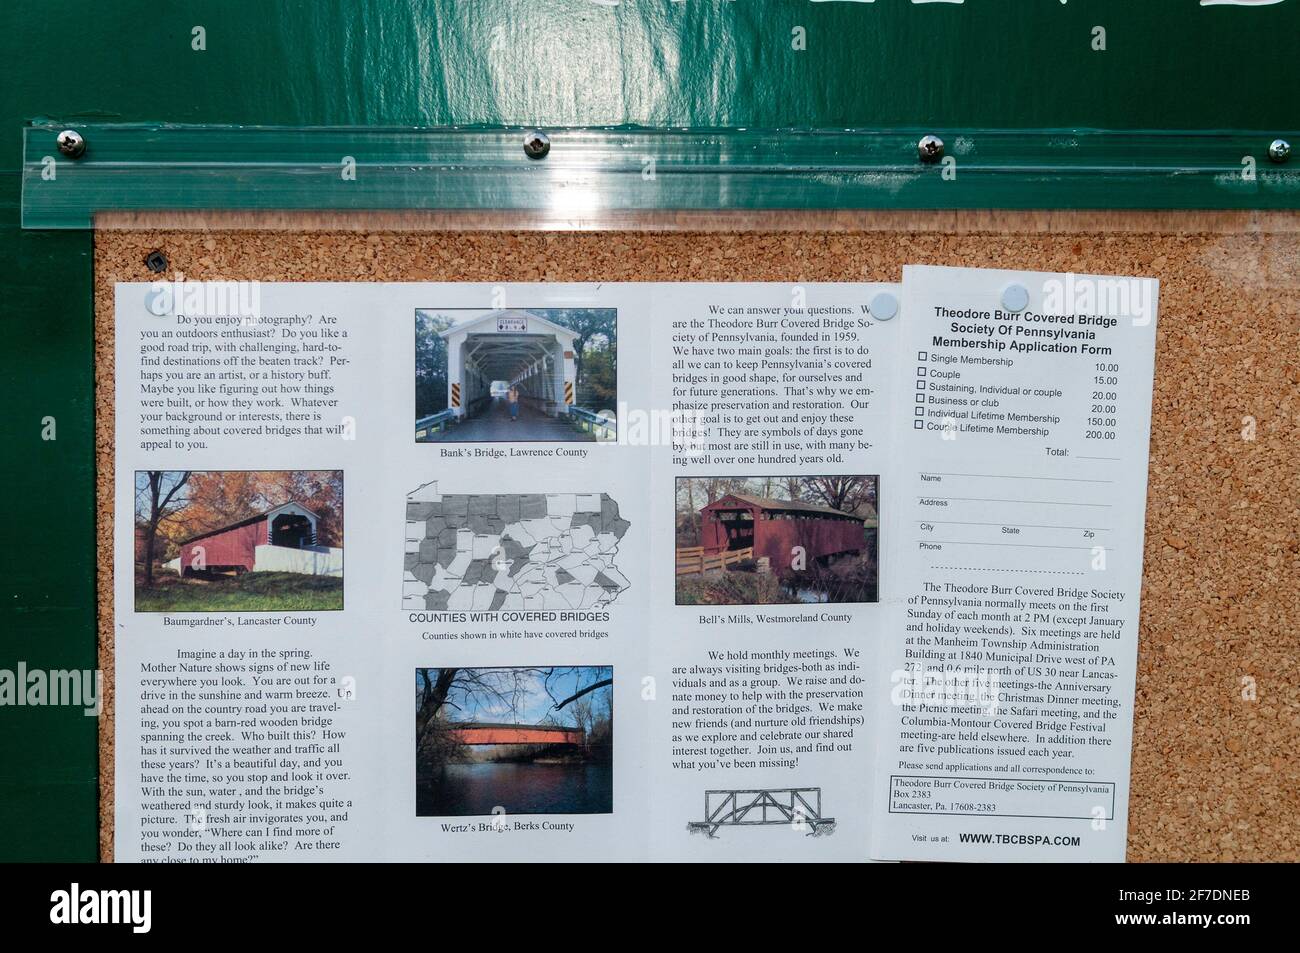 Bulletin board posting information about covered bridges by the Theodore Burr Covered Bridge Society in Pennsylvania, USA. Stock Photo